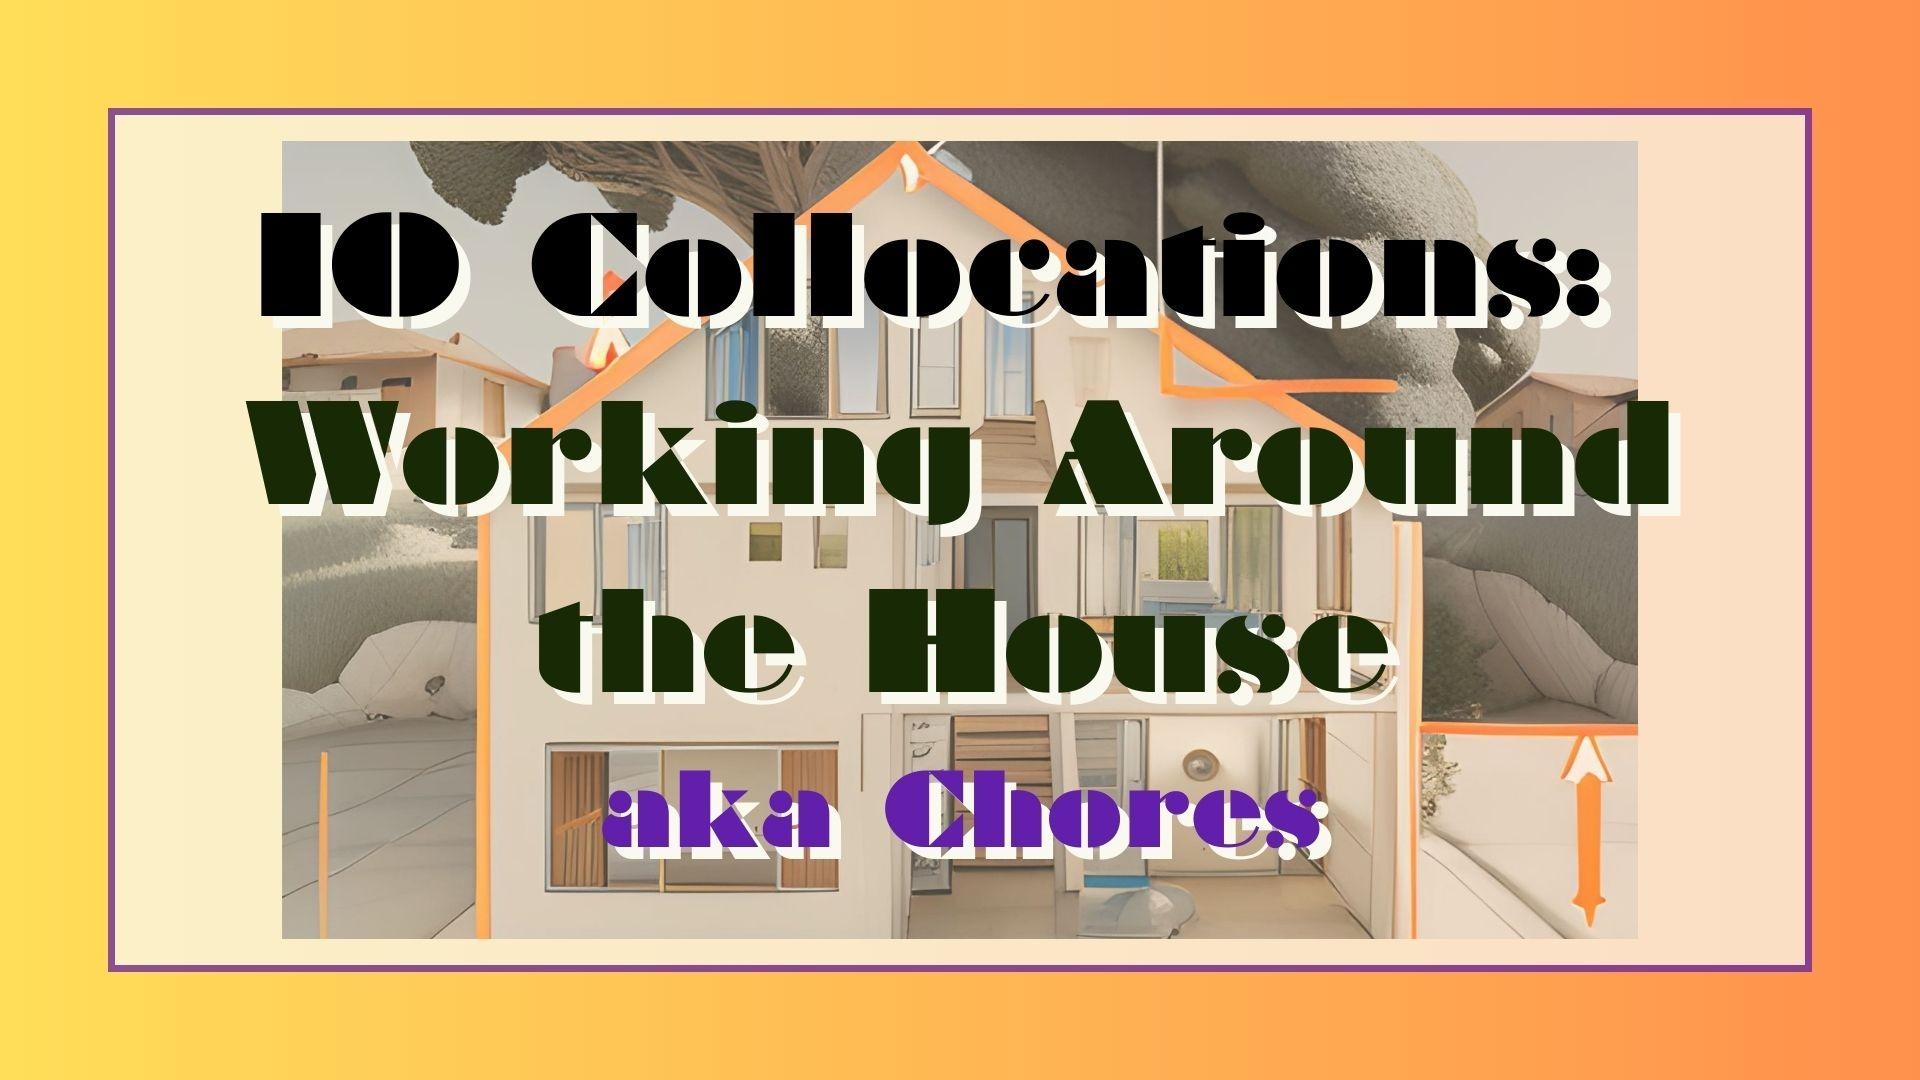 10 Collocations: Work Around the House